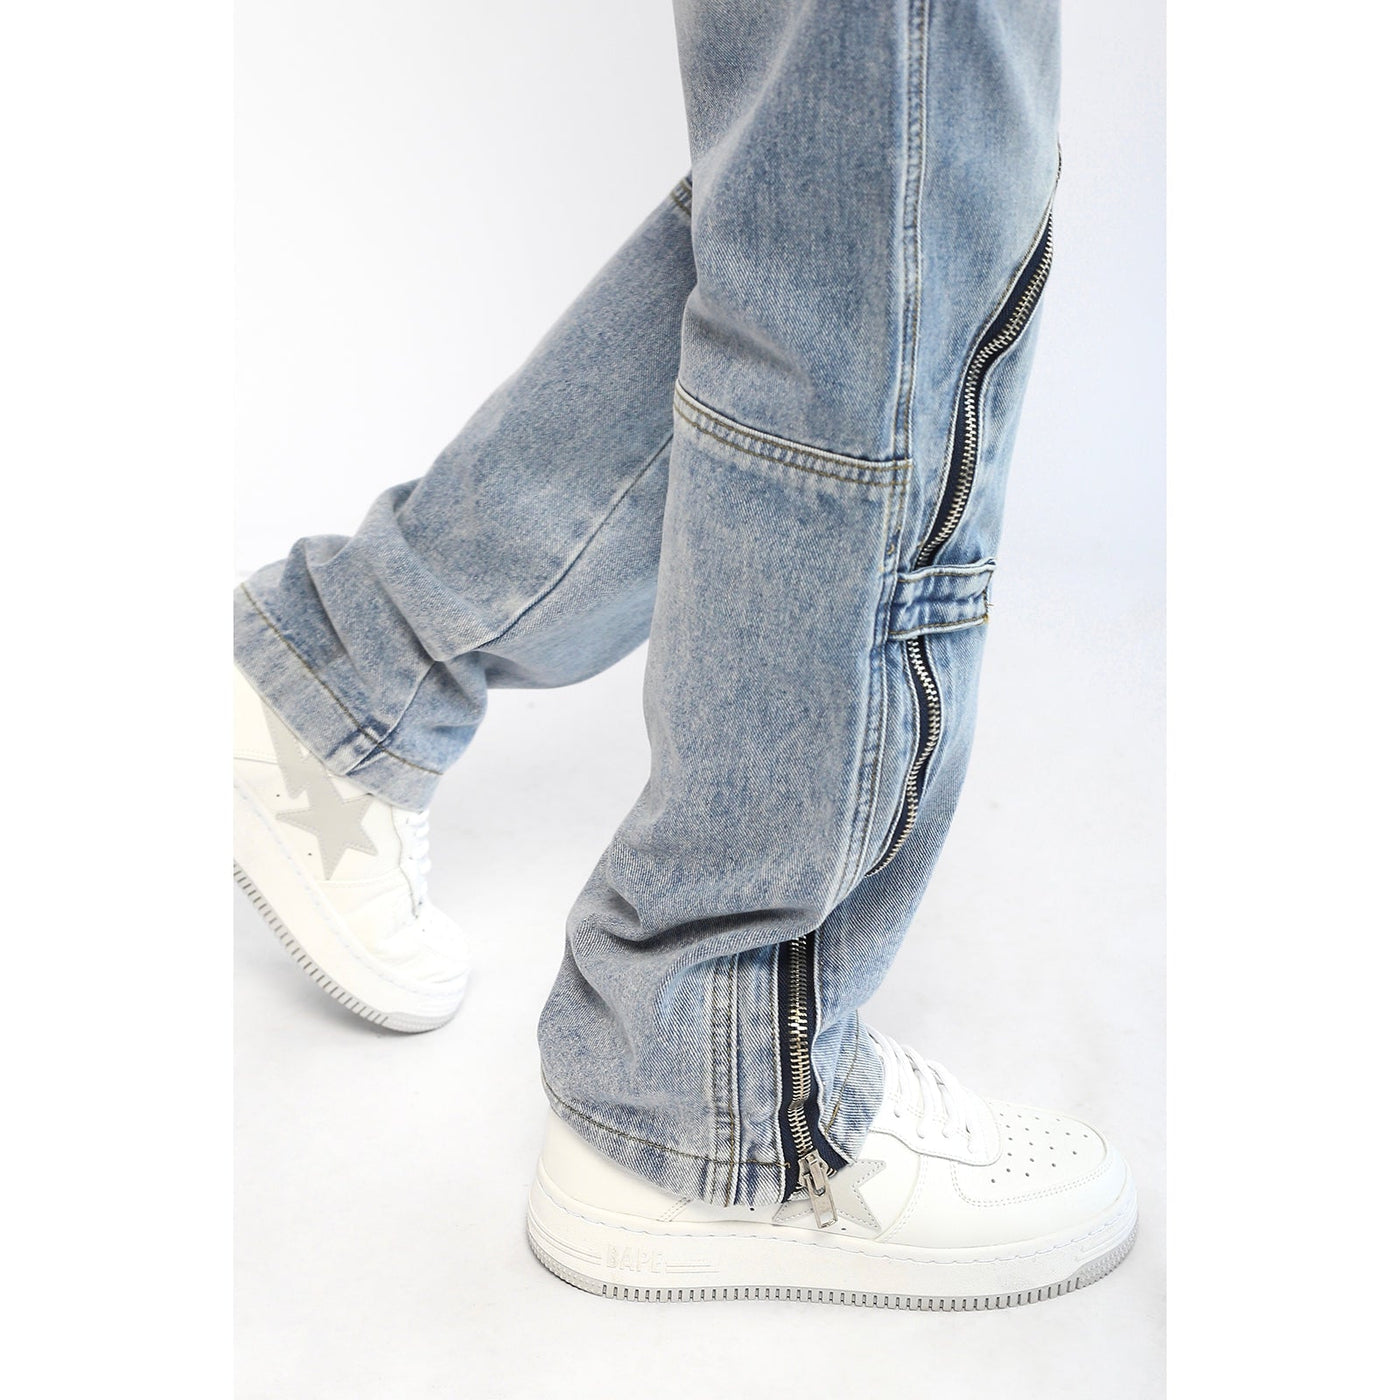 Rogue Zipper Jeans Korean Street Fashion Jeans By Poikilotherm Shop Online at OH Vault